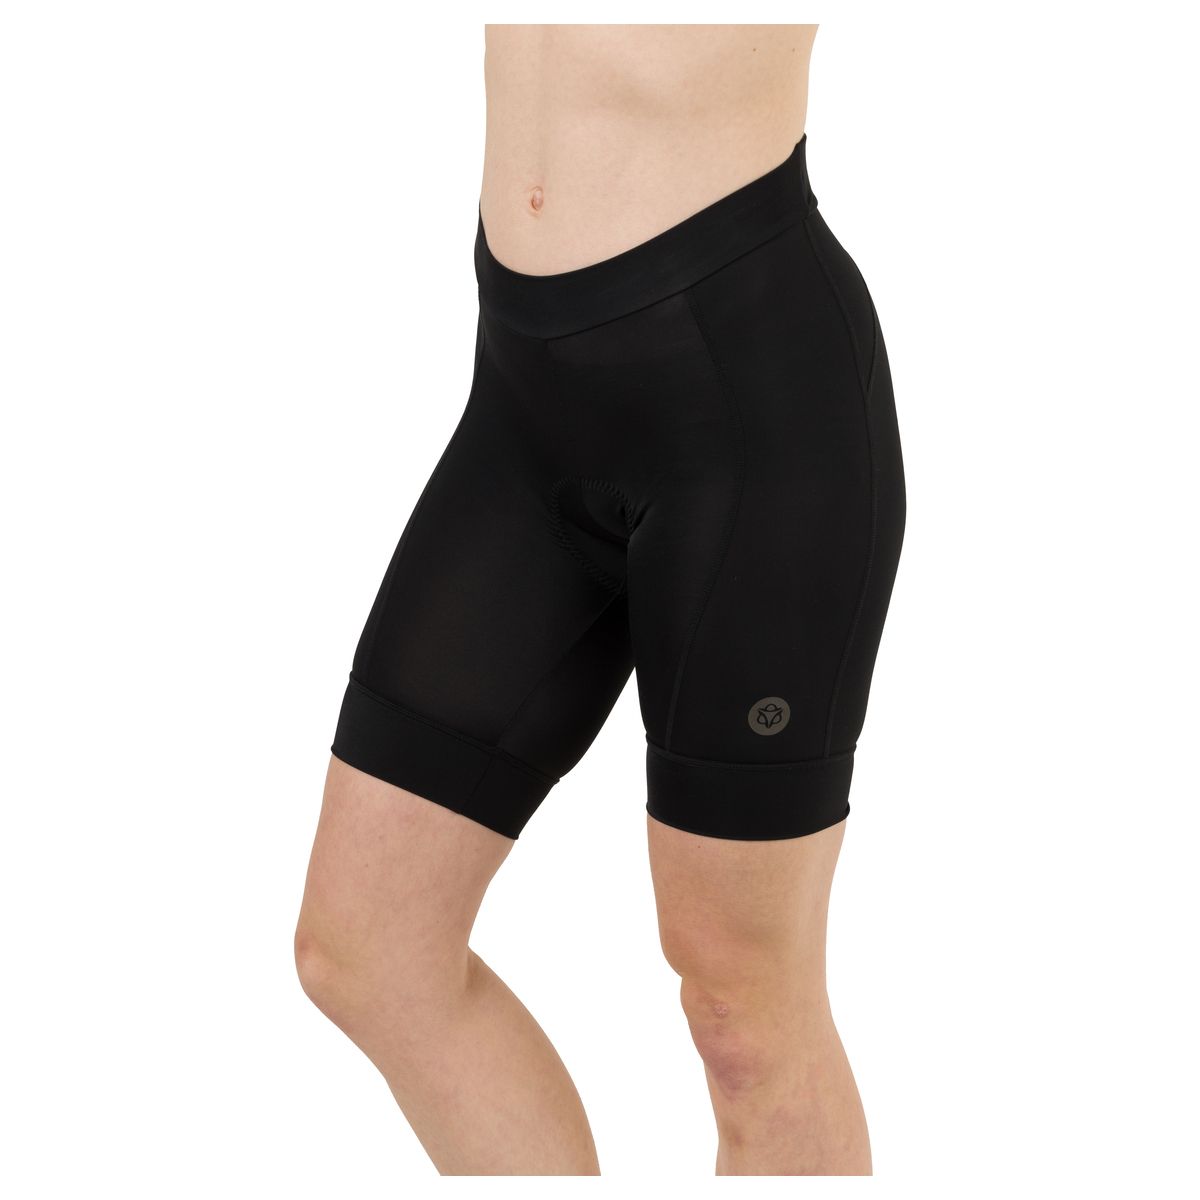 Culote Corto II Essential Mujeres fit example